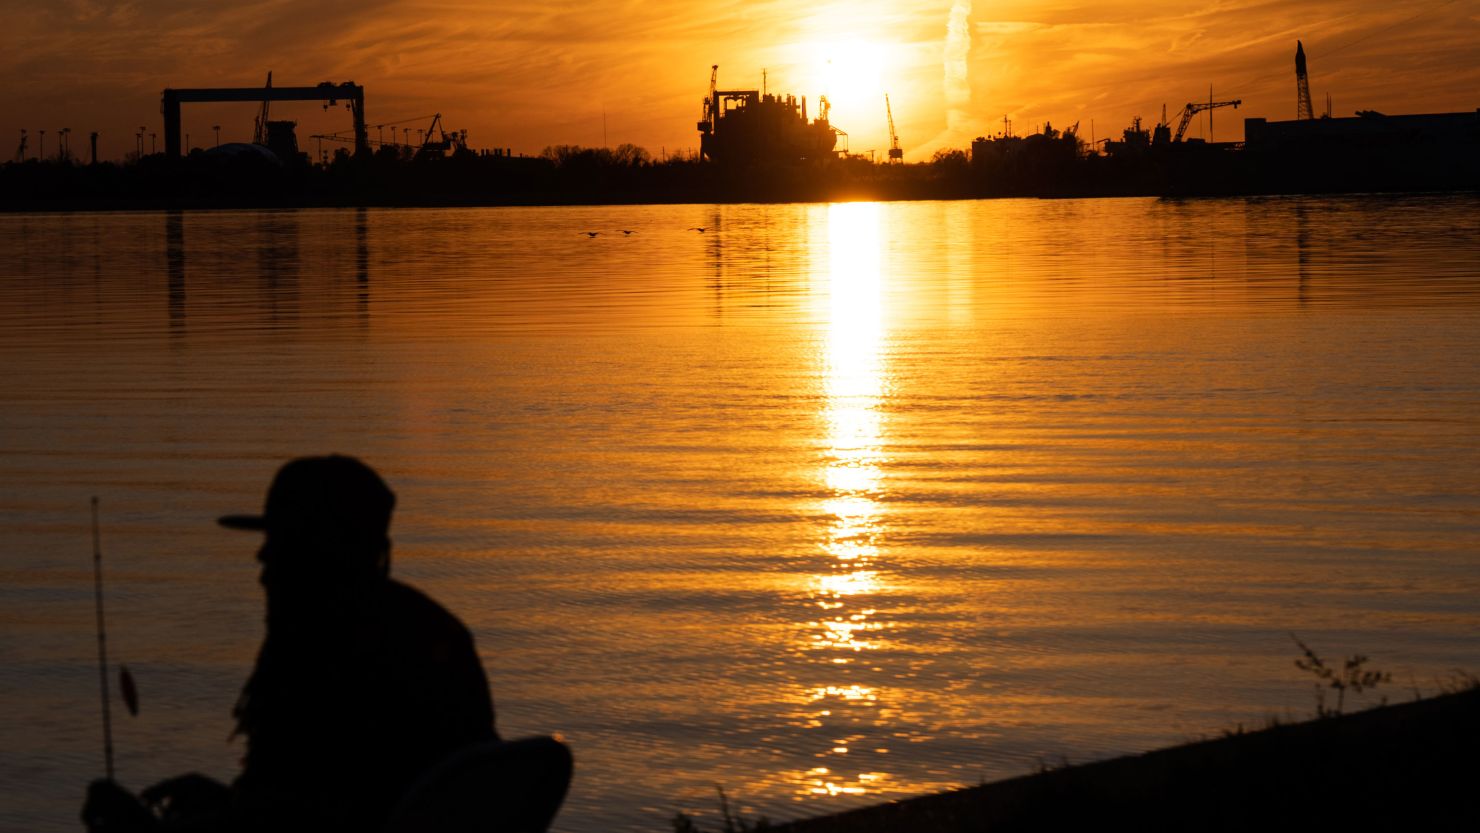 The sun sets behind a fossil fuel complex on the Mobile River in Alabama.